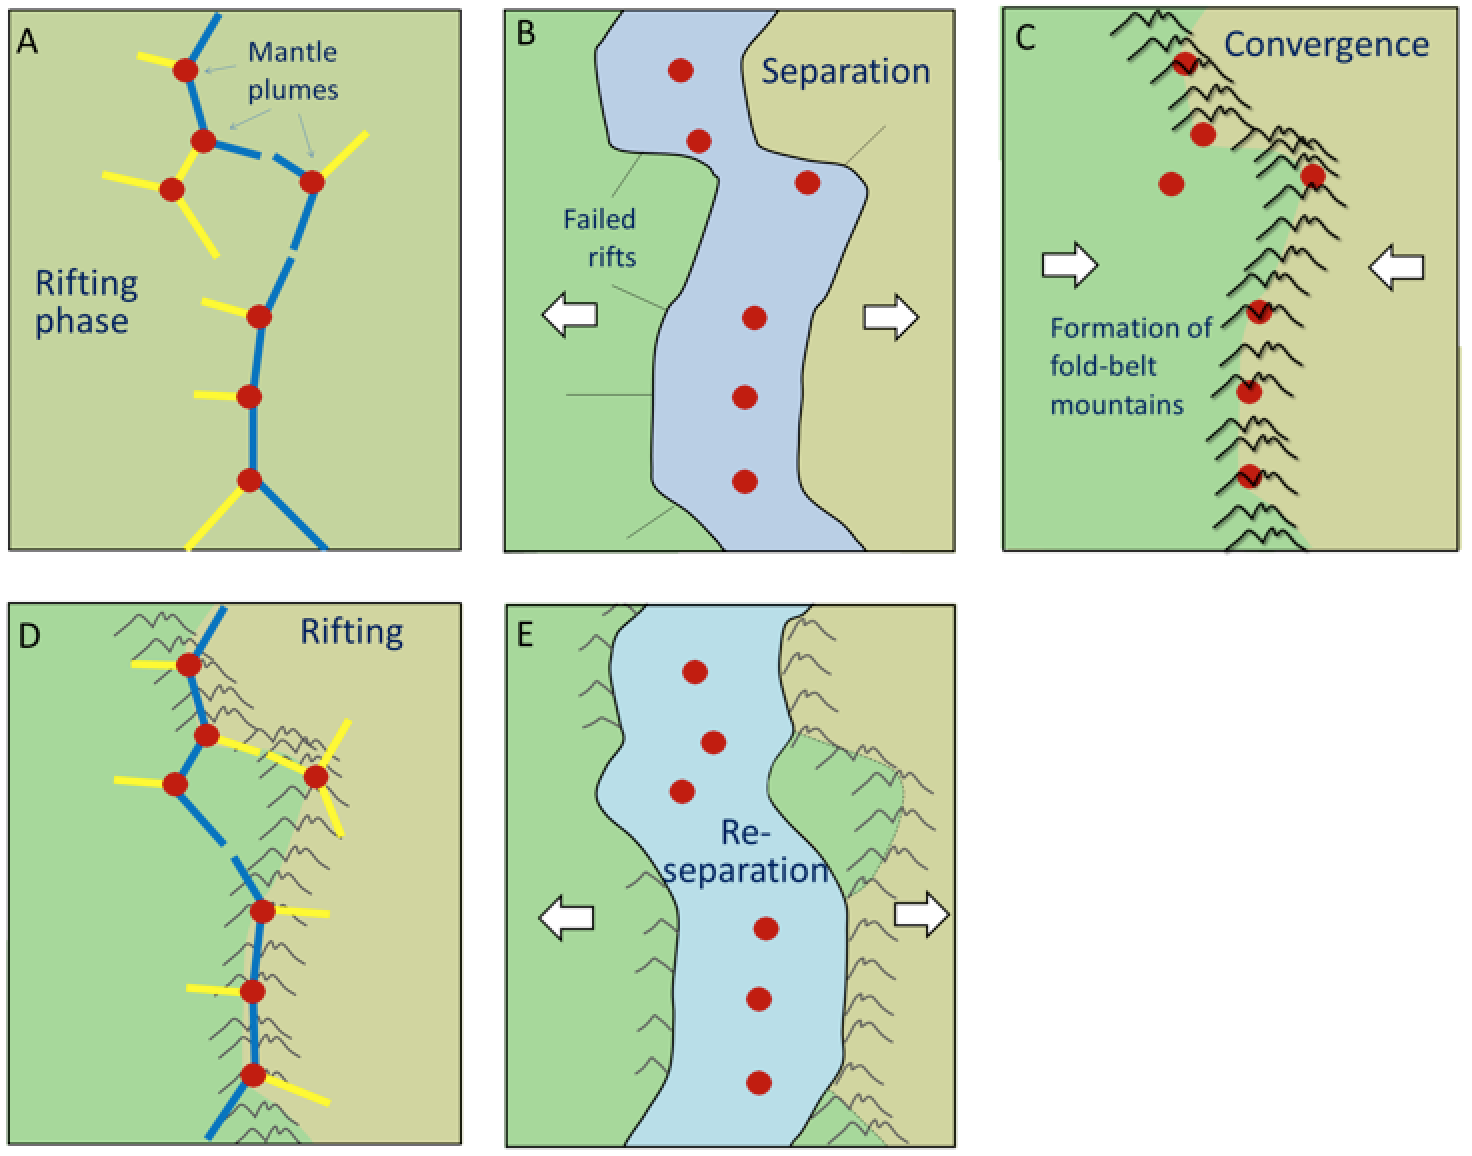 A scenario for the Wilson cycle. The cycle starts with continental rifting above a series of mantle plumes (red dots, A). The continents separate (B), and then re-converge some time later, forming a fold-belt mountain chain. Eventually rifting is repeated, possibly because of the same set of mantle plumes (D), but this time the rift is in a different place. _Source: Steven Earle (2015) CC BY 4.0 _[_view source_](http://opentextbc.ca/geology/wp-content/uploads/sites/110/2015/07/Wilson-cycle.png)